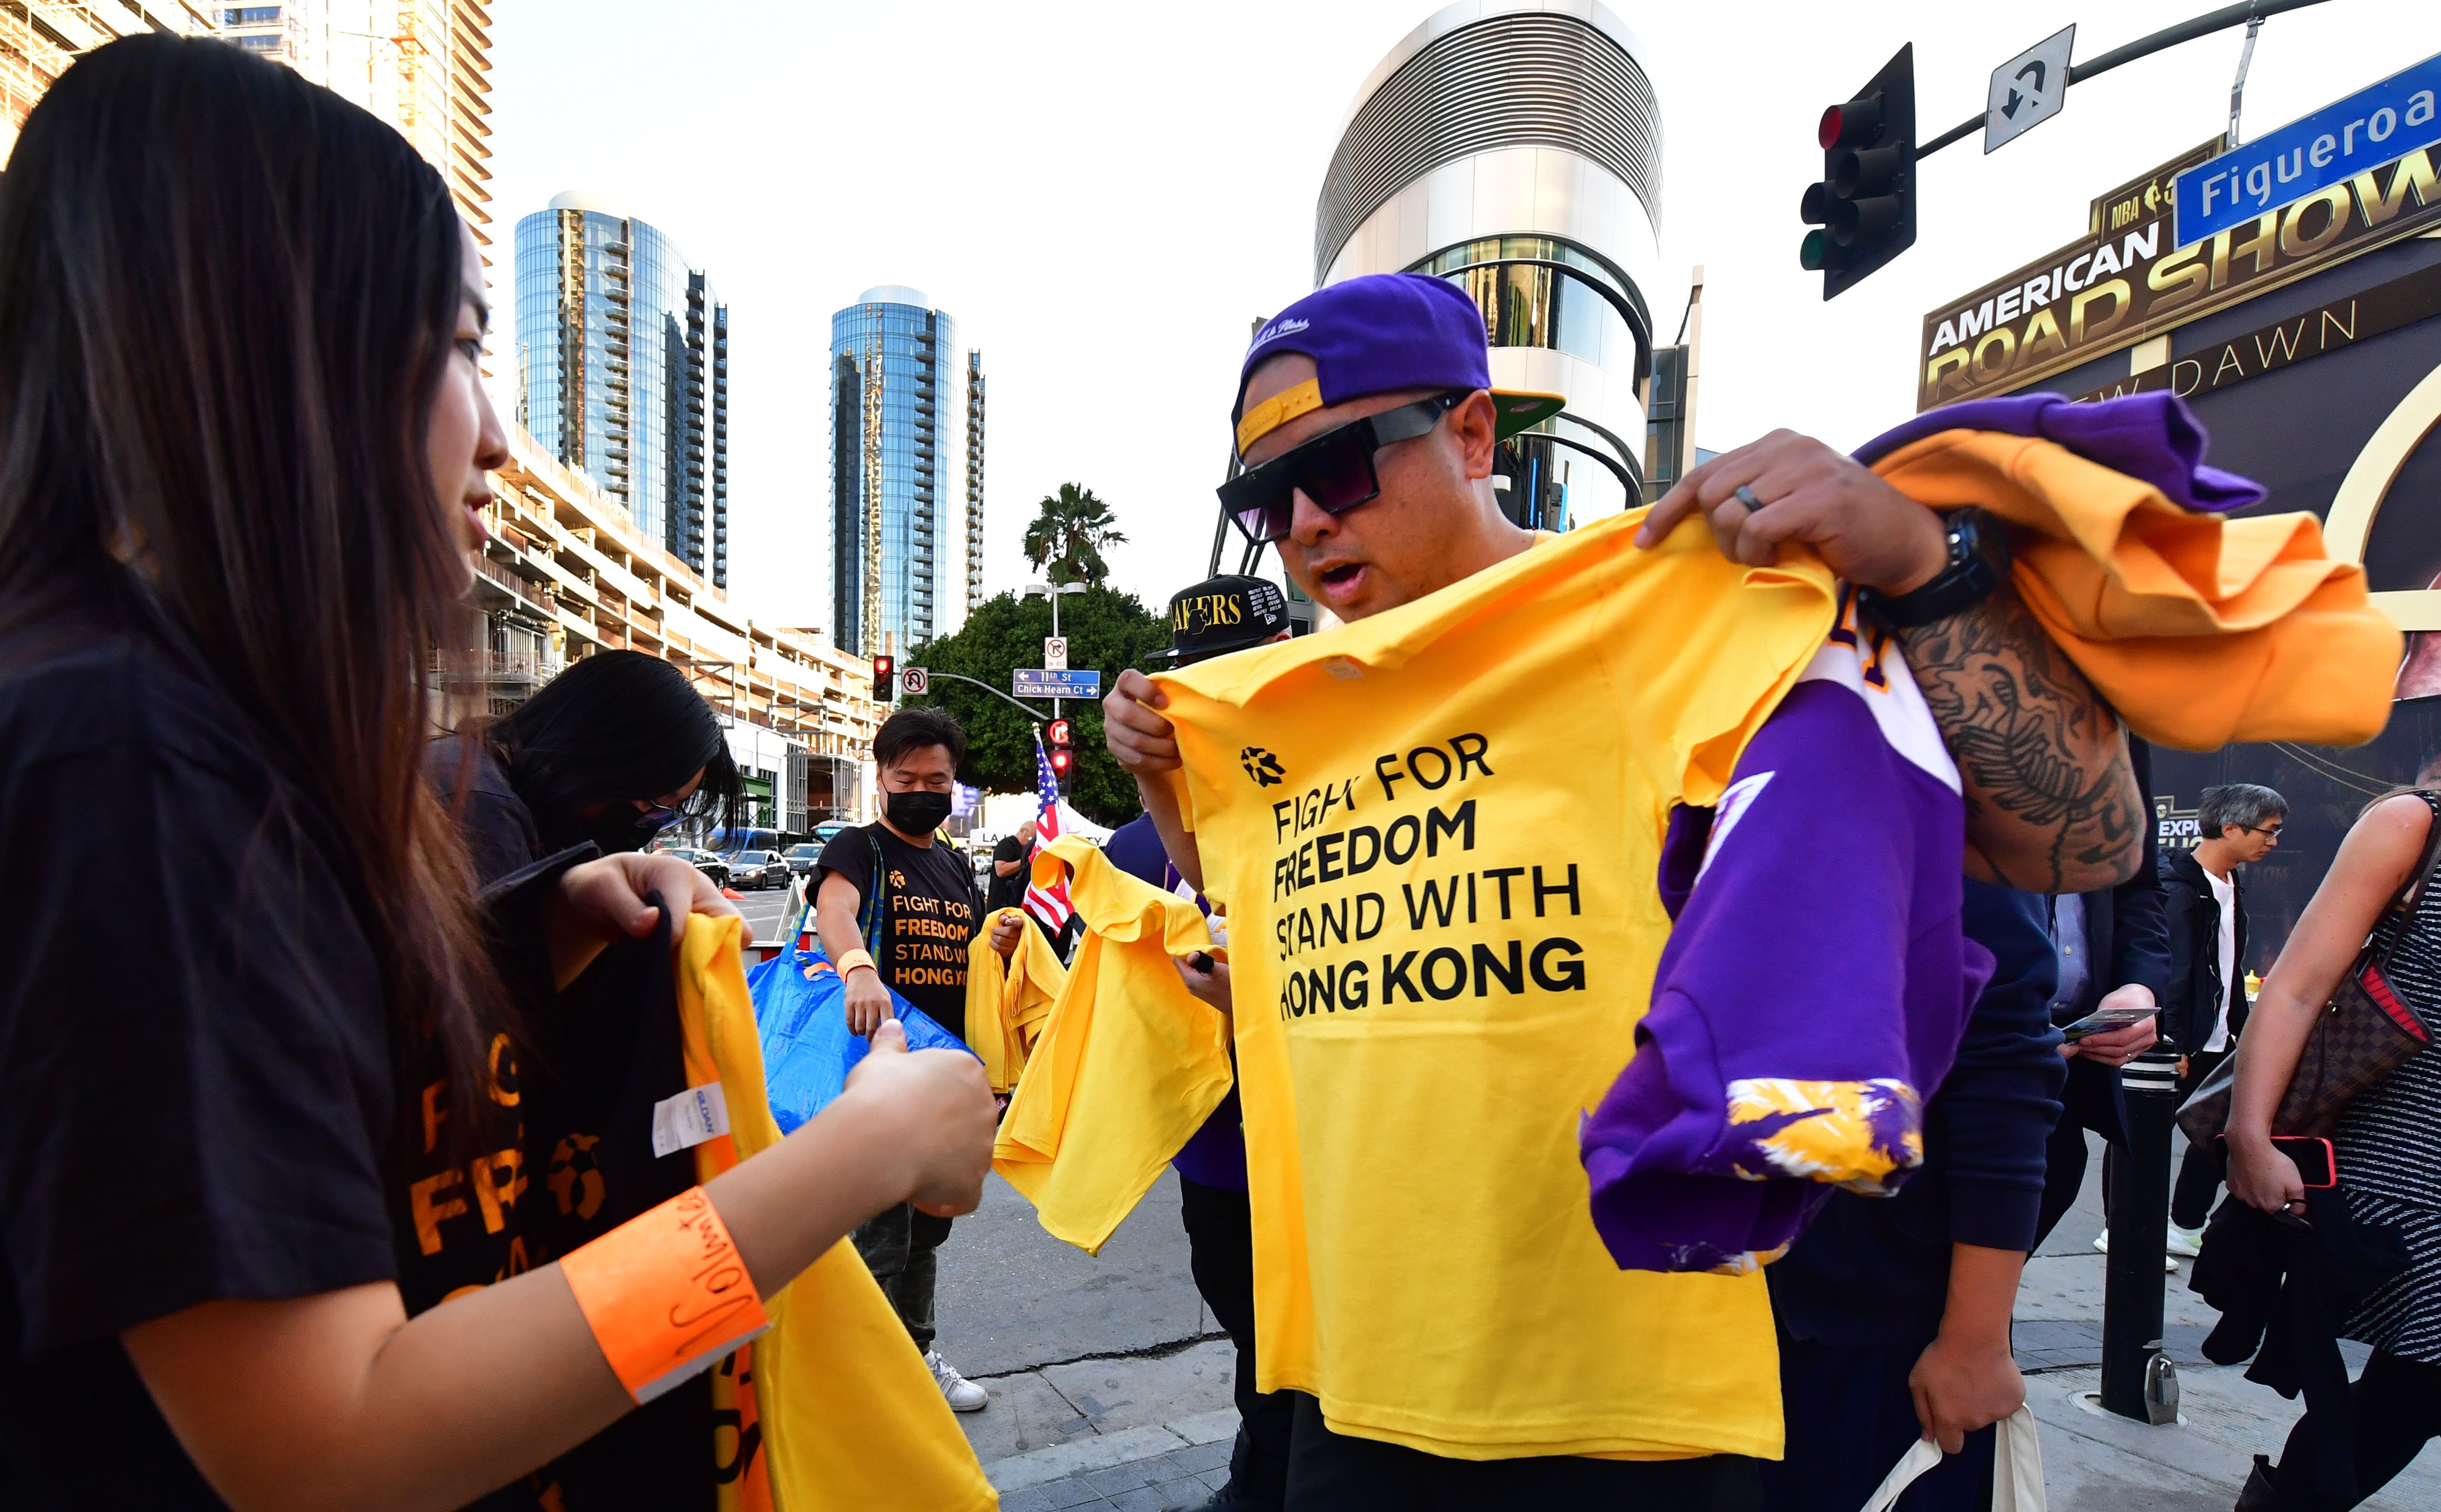 NBA store says 'Free Hong Kong' was 'inadvertently prohibited' from jerseys